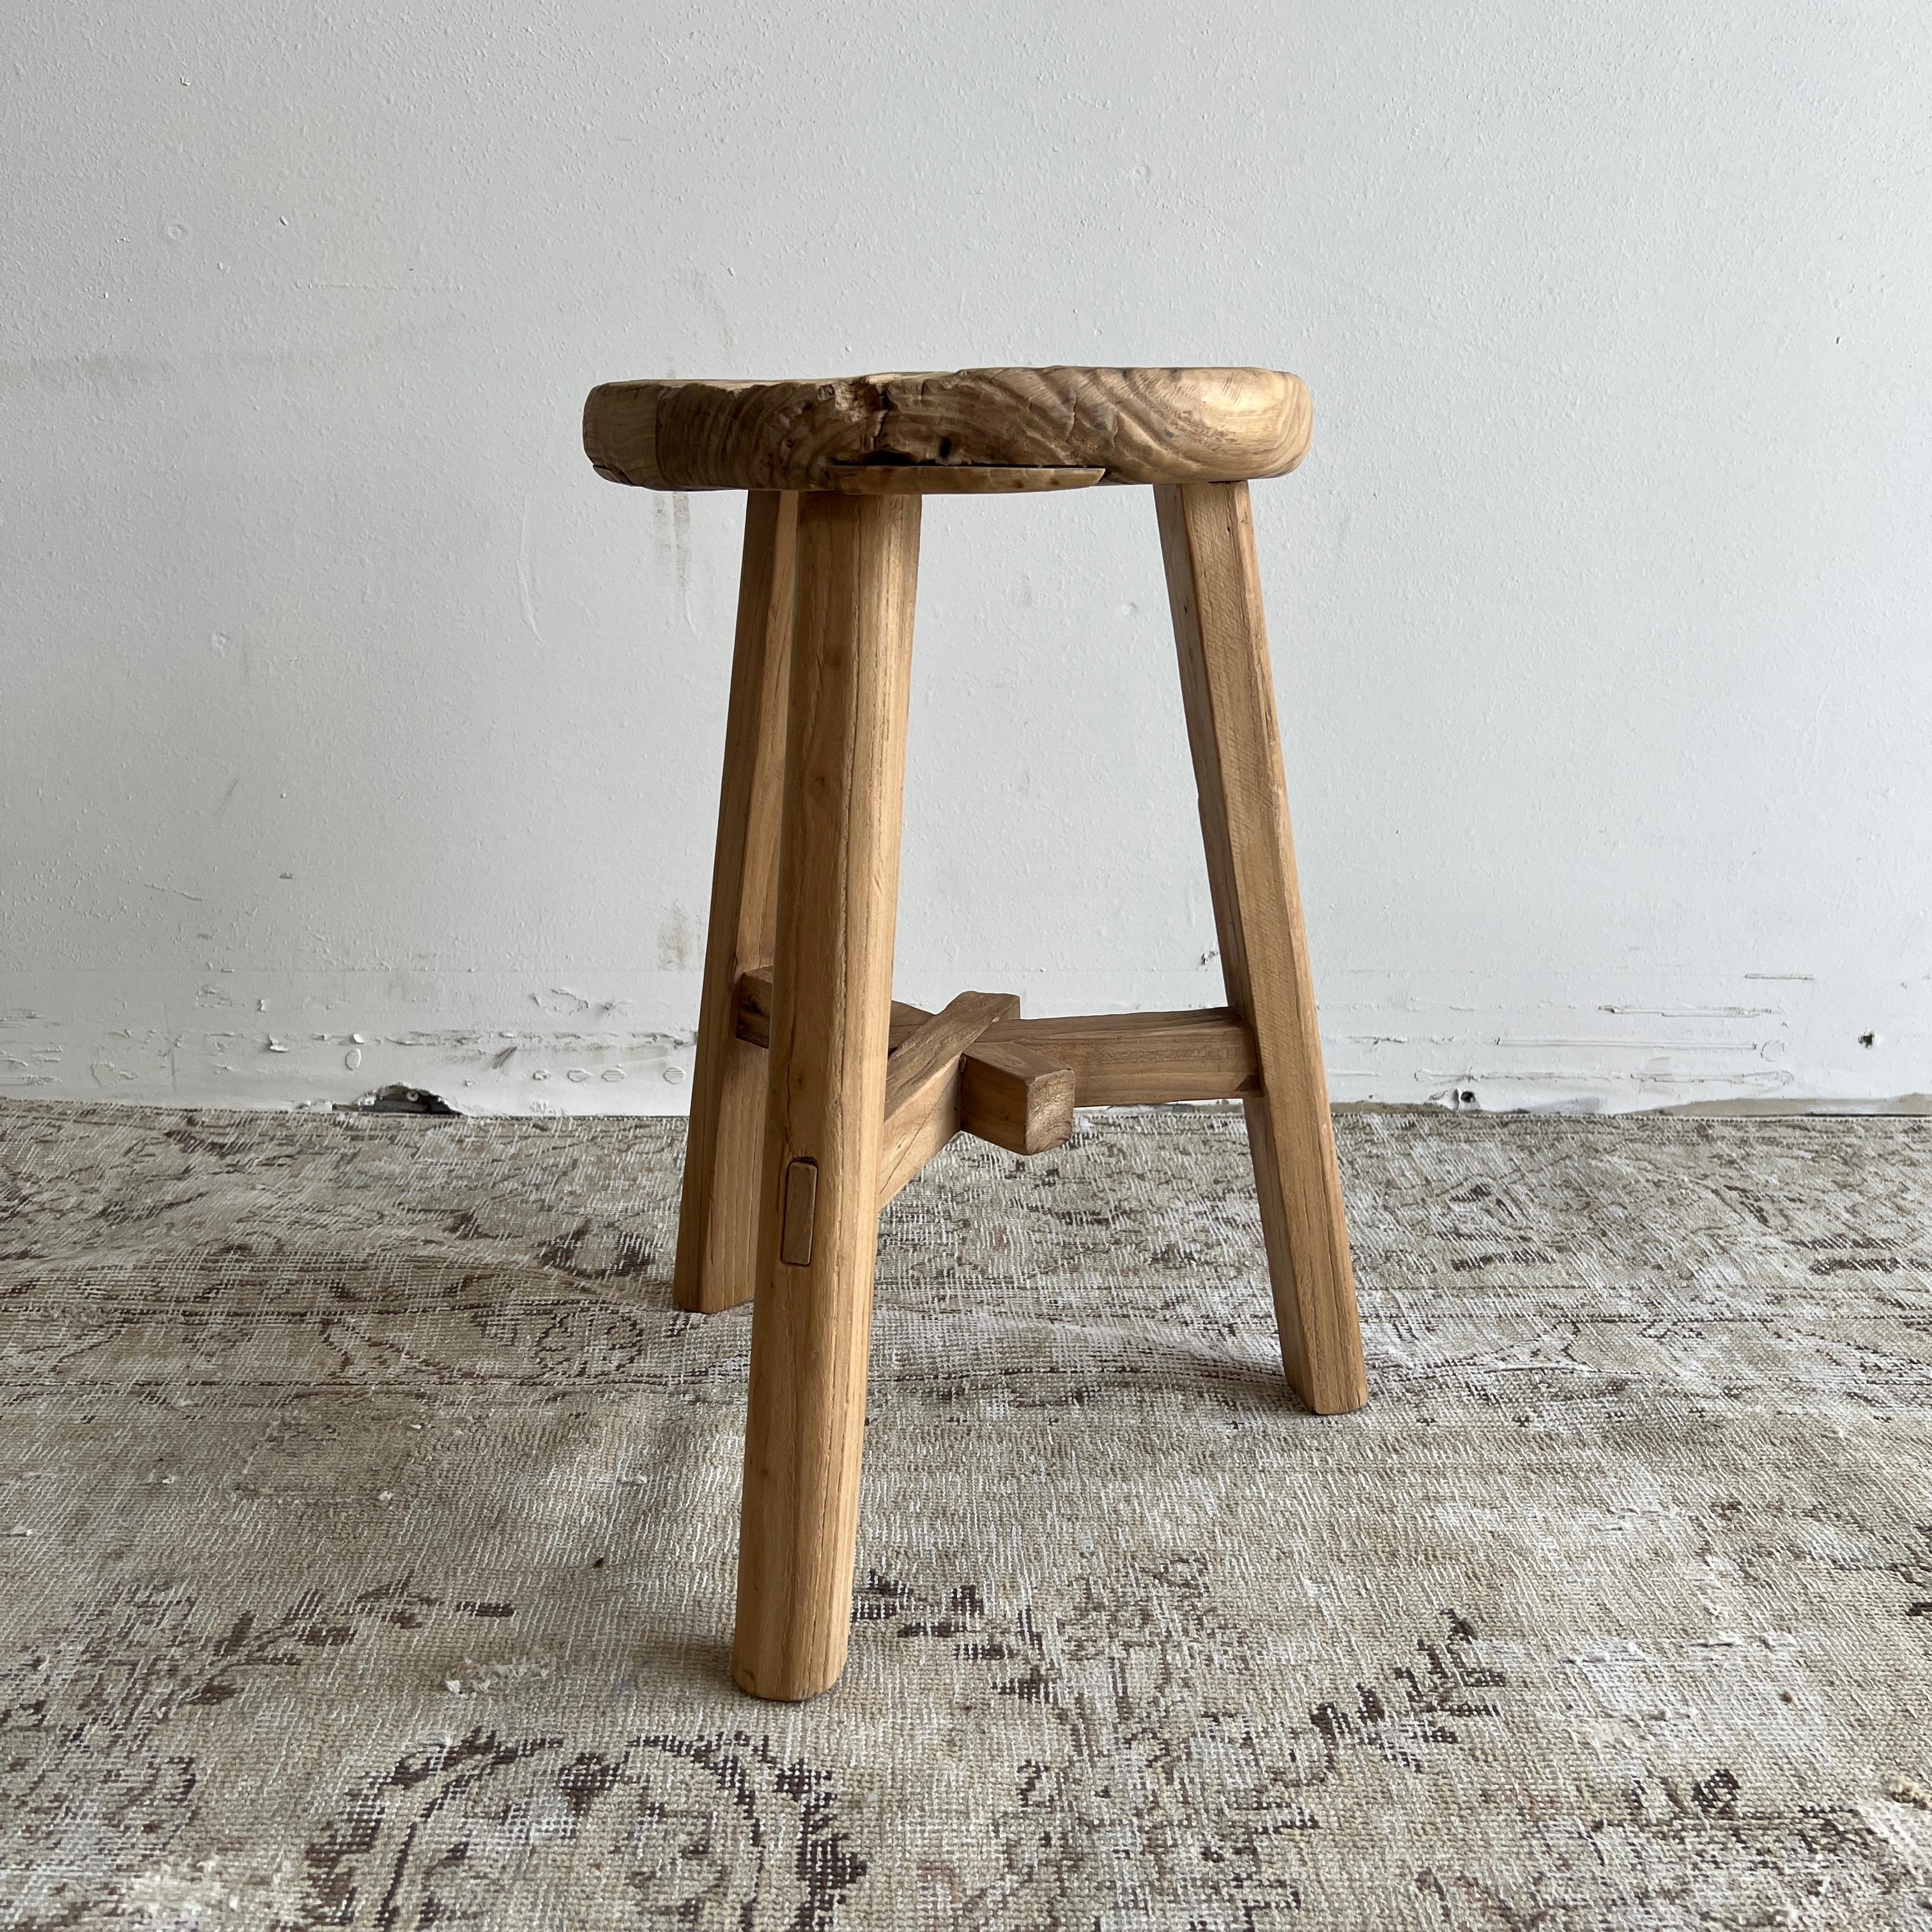 Vintage antique elmwood stool
These are the real vintage antique elmwood stools! Beautiful antique patina, with weathering and age, these are solid and sturdy ready for daily use, use as a table, stool, drink table, they are great for any